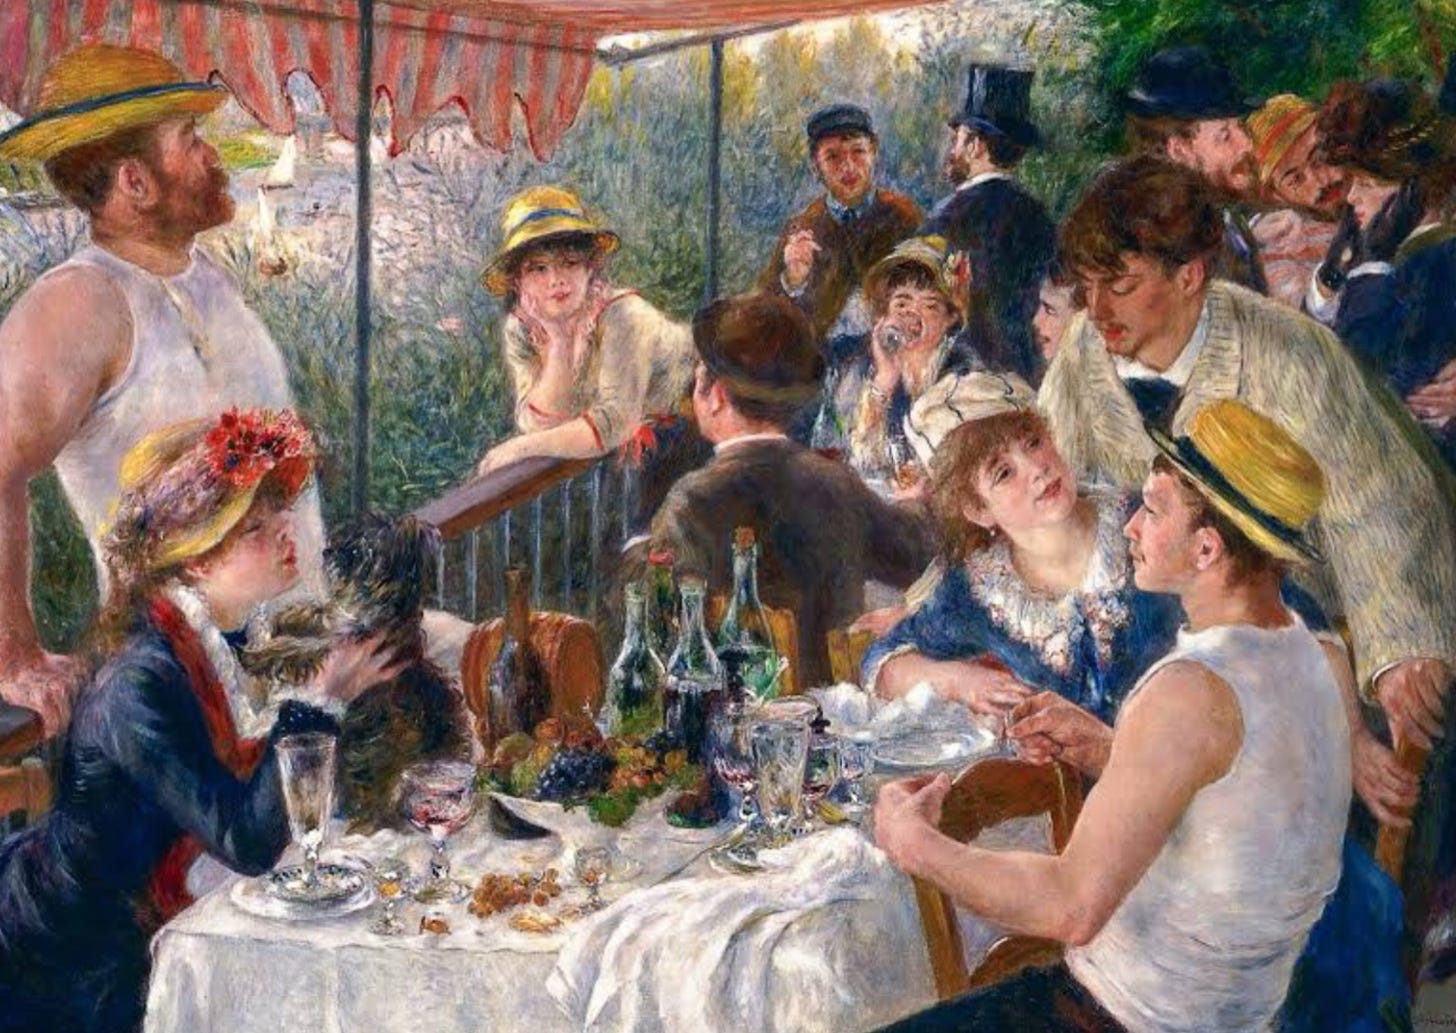 a happy scene of young people having a good time in summer around a lunch table